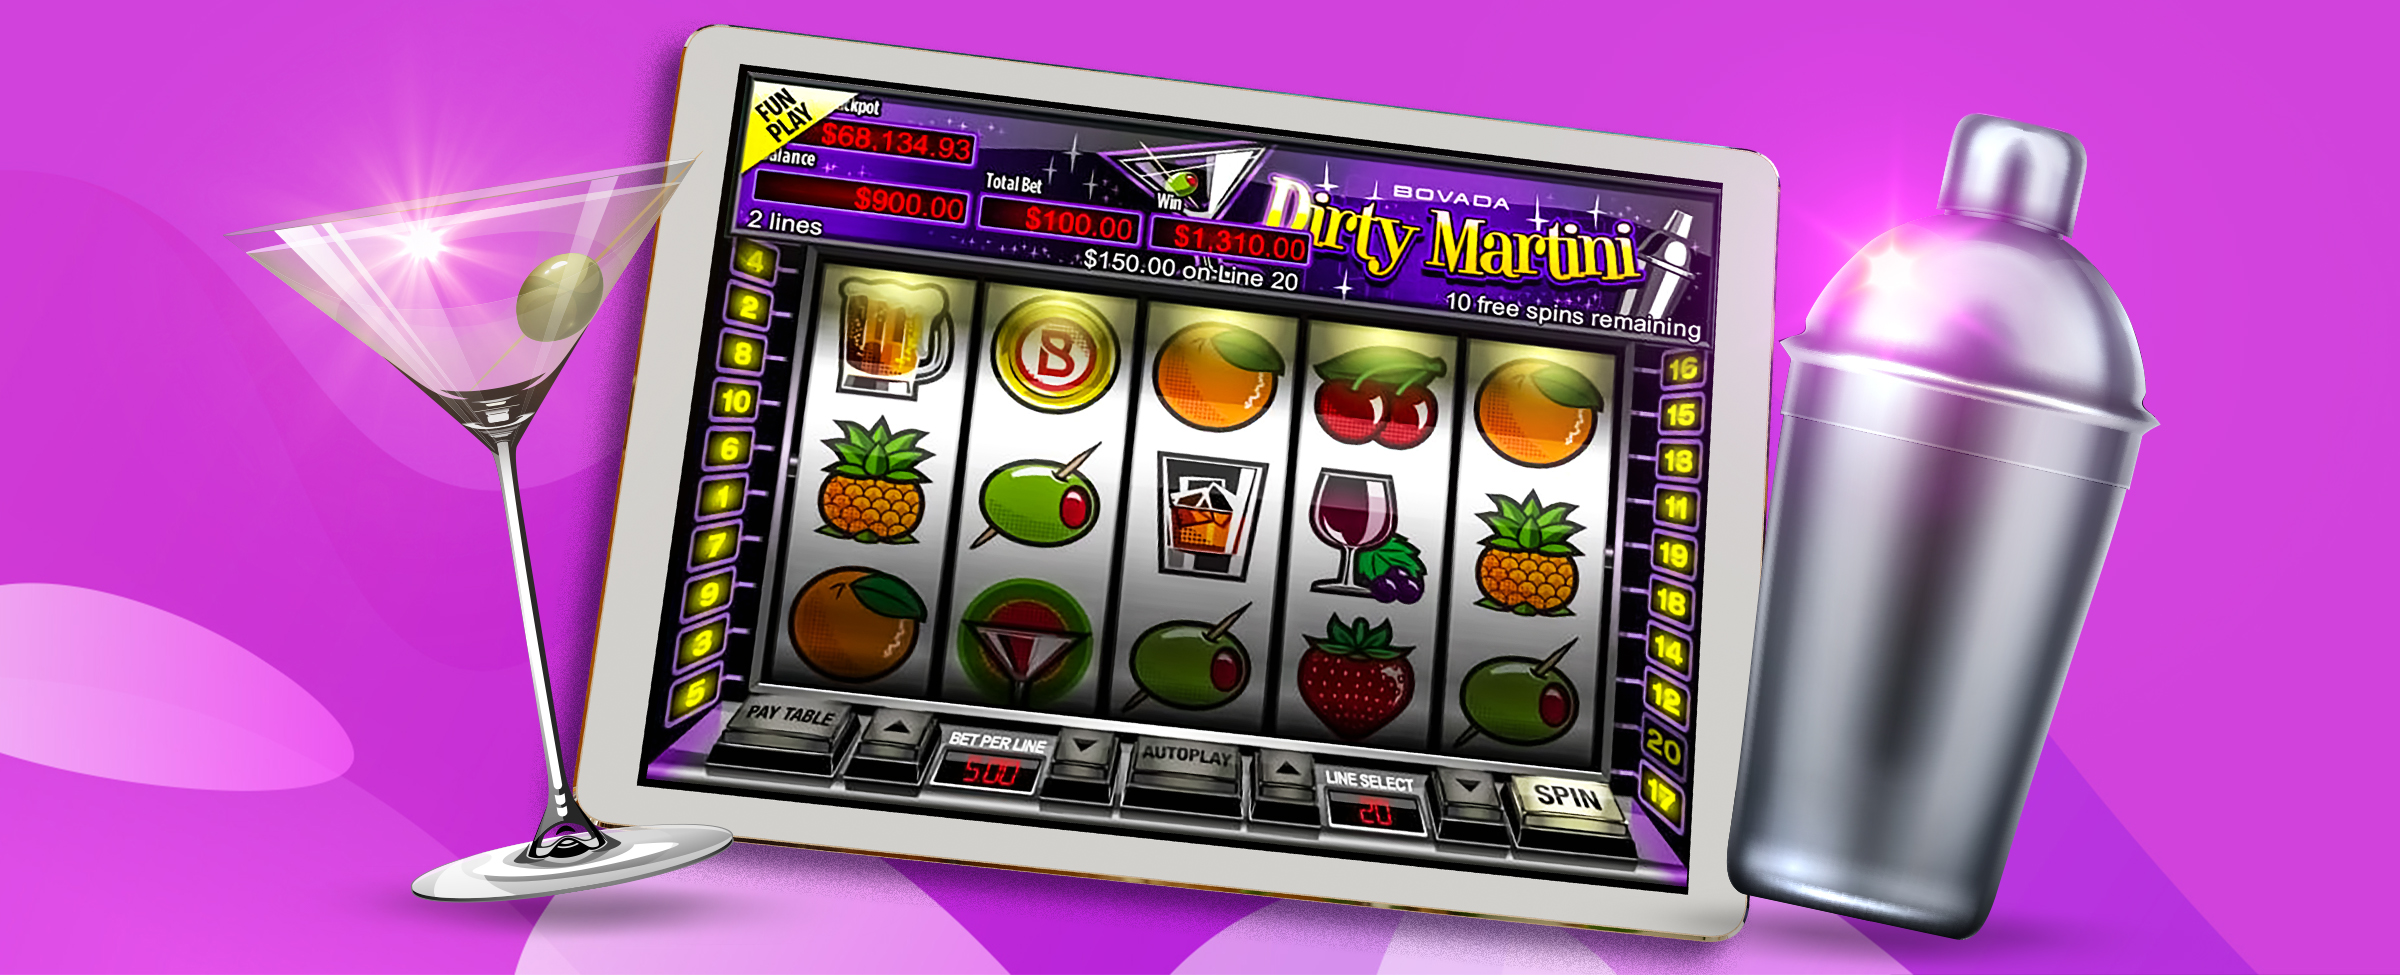 Grab an olive and settle in for your very own Dirty Martini slot game! This slot channels all the visual thrills of yesteryear. Are you game?